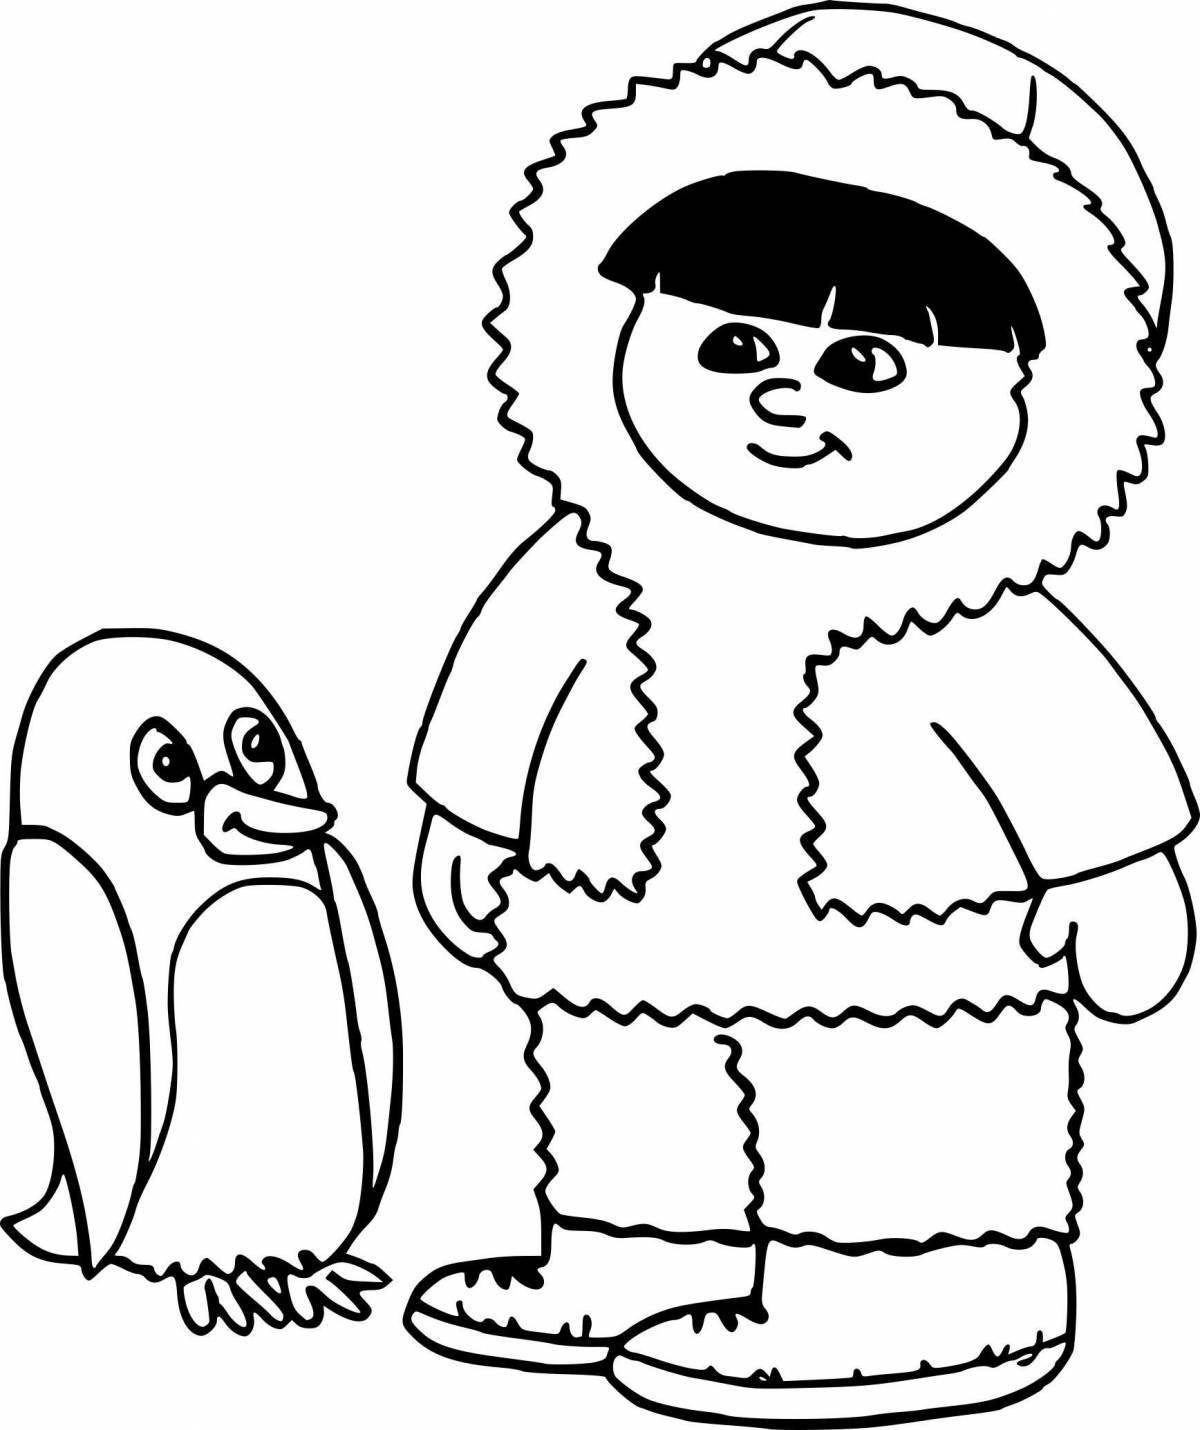 Coloring page of luxurious Chukchi national costume